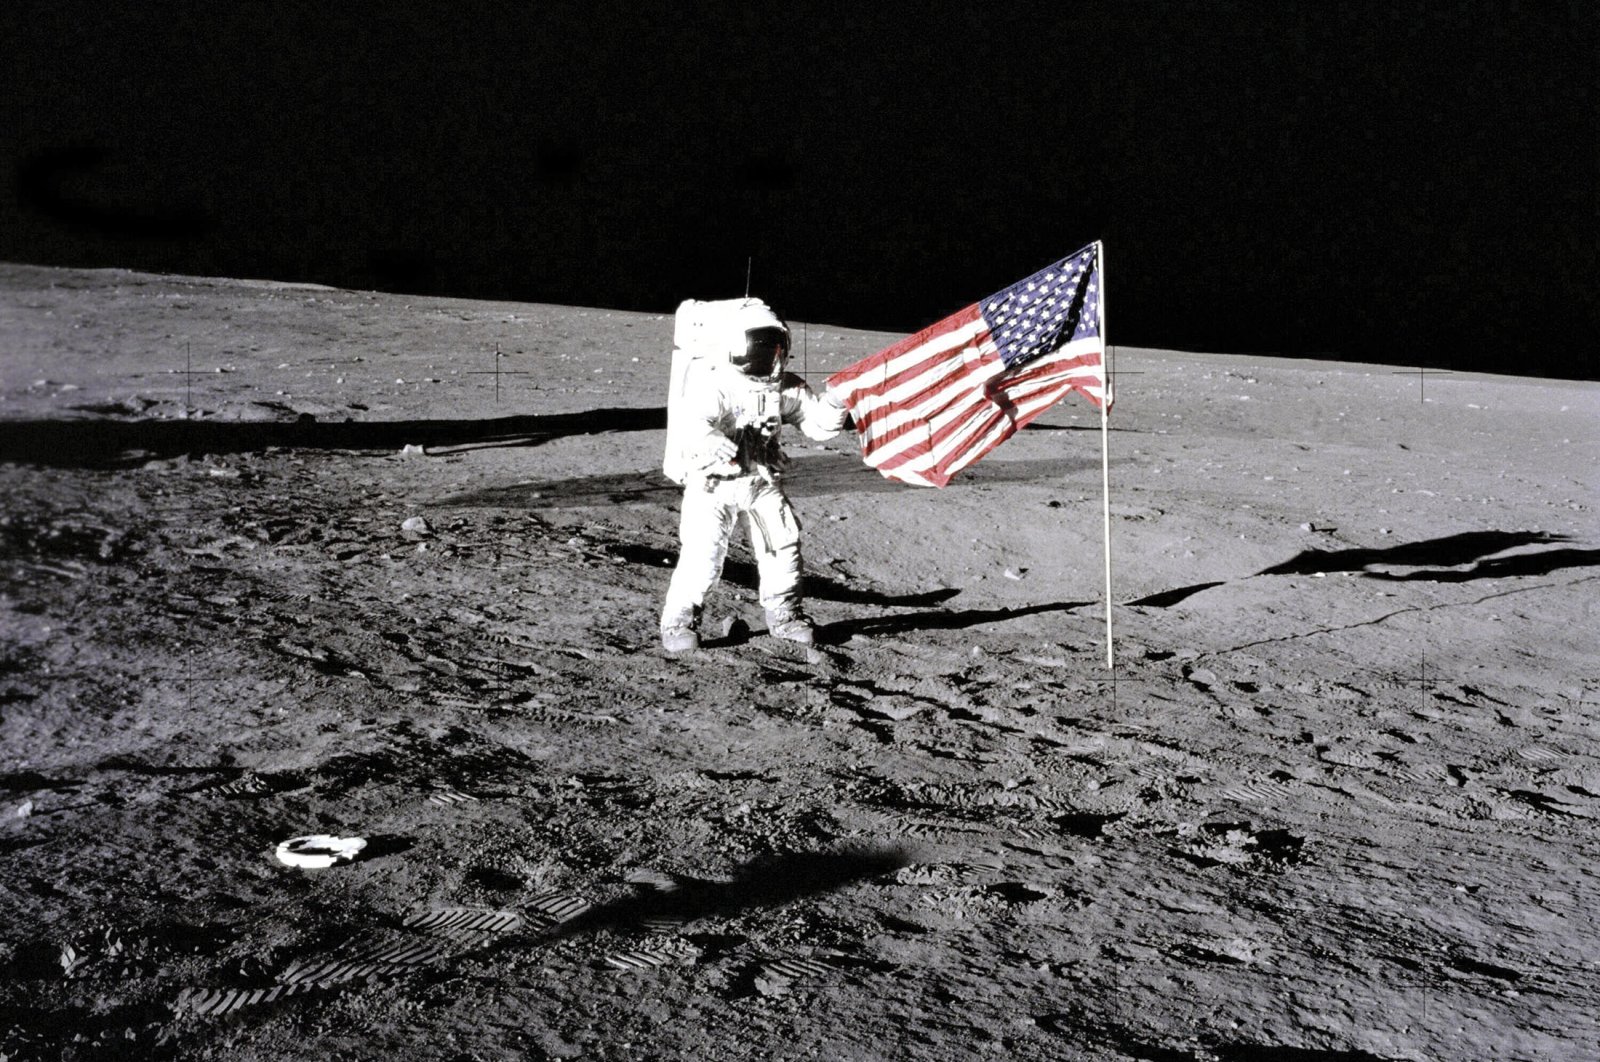 Apollo 12 astronaut Charles Conrad stands beside the United States flag unfurled by Apollo 11 astronauts on the moon, Space, Nov. 19, 1969. (Getty Images Photo)